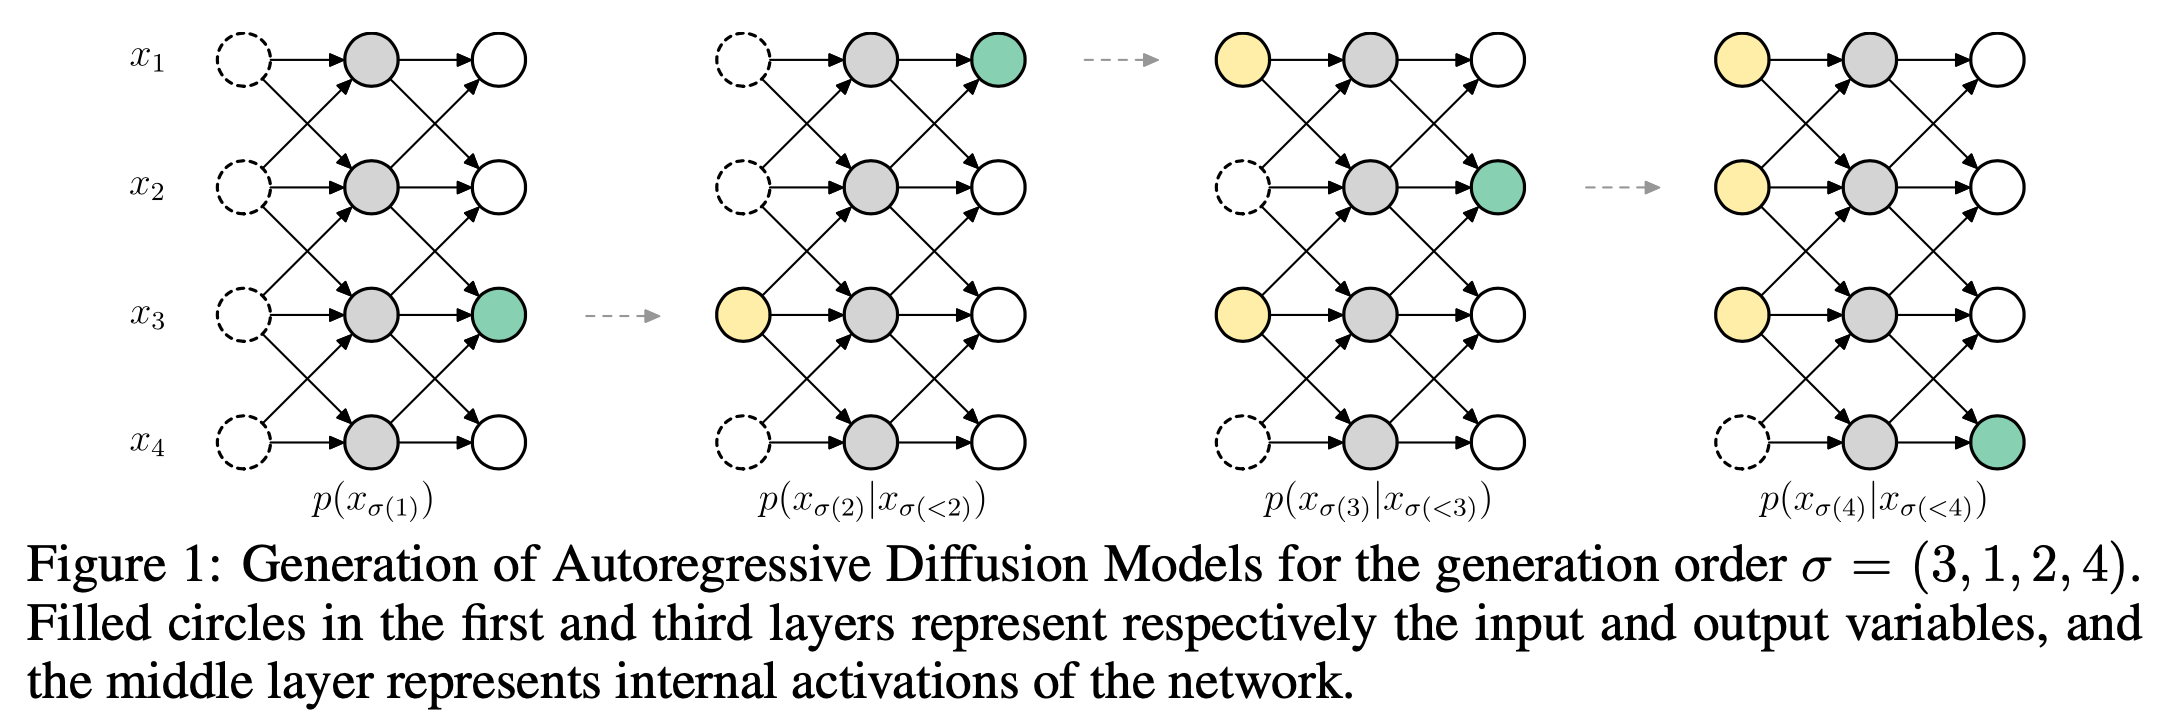 Generation of variables with ARDM. Figure taken from the <a href="https://openreview.net/forum?id=Lm8T39vLDTE">Autoregressive Diffusion Models paper</a>